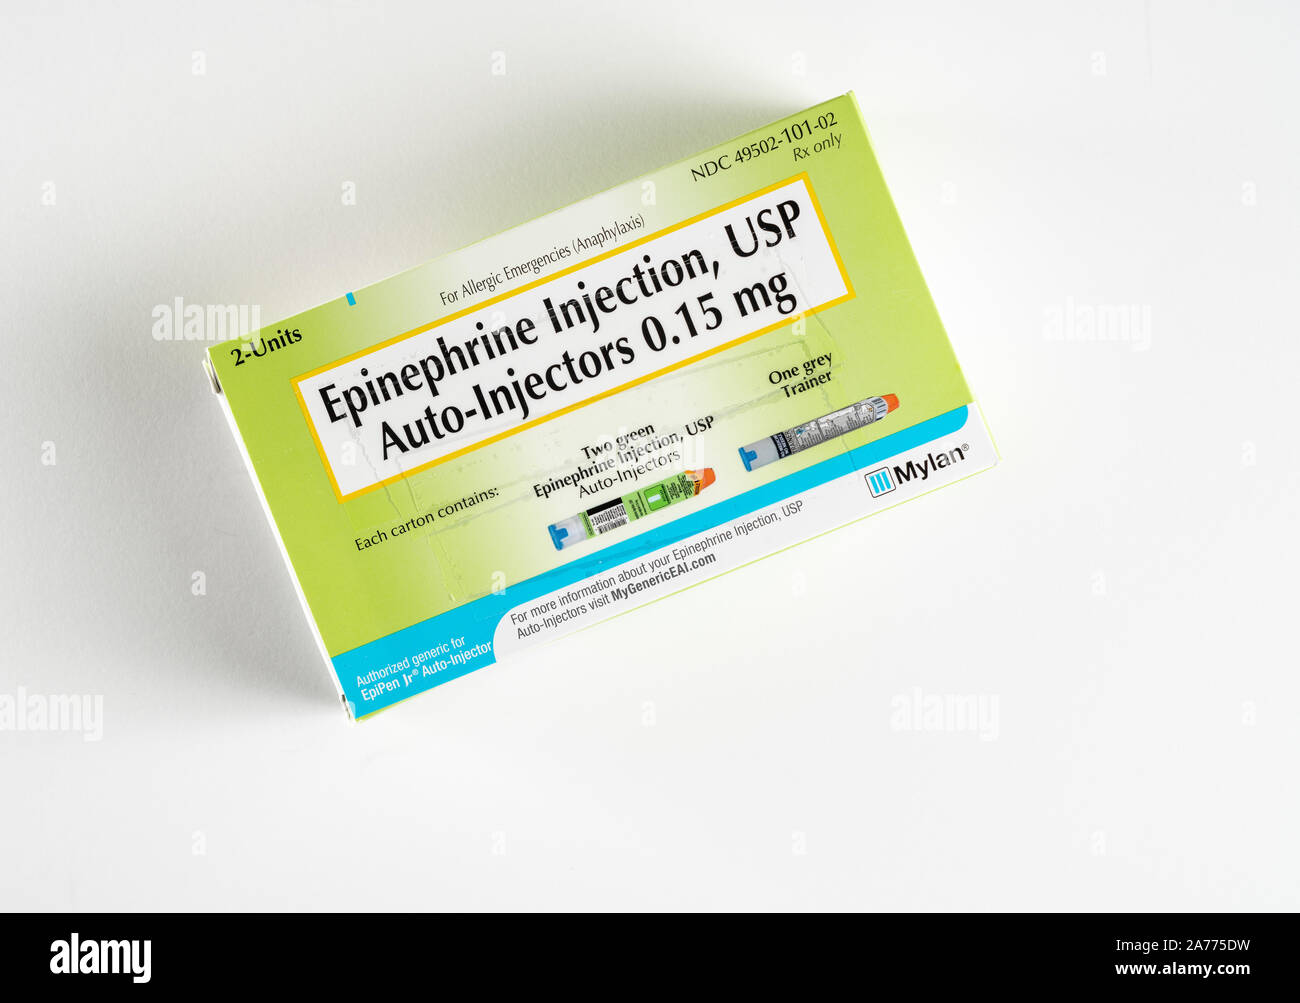 Morgantown, WV - 30 October 2019: Prescription box for two junior EpiPens for anaphylaxis in children or infants Stock Photo